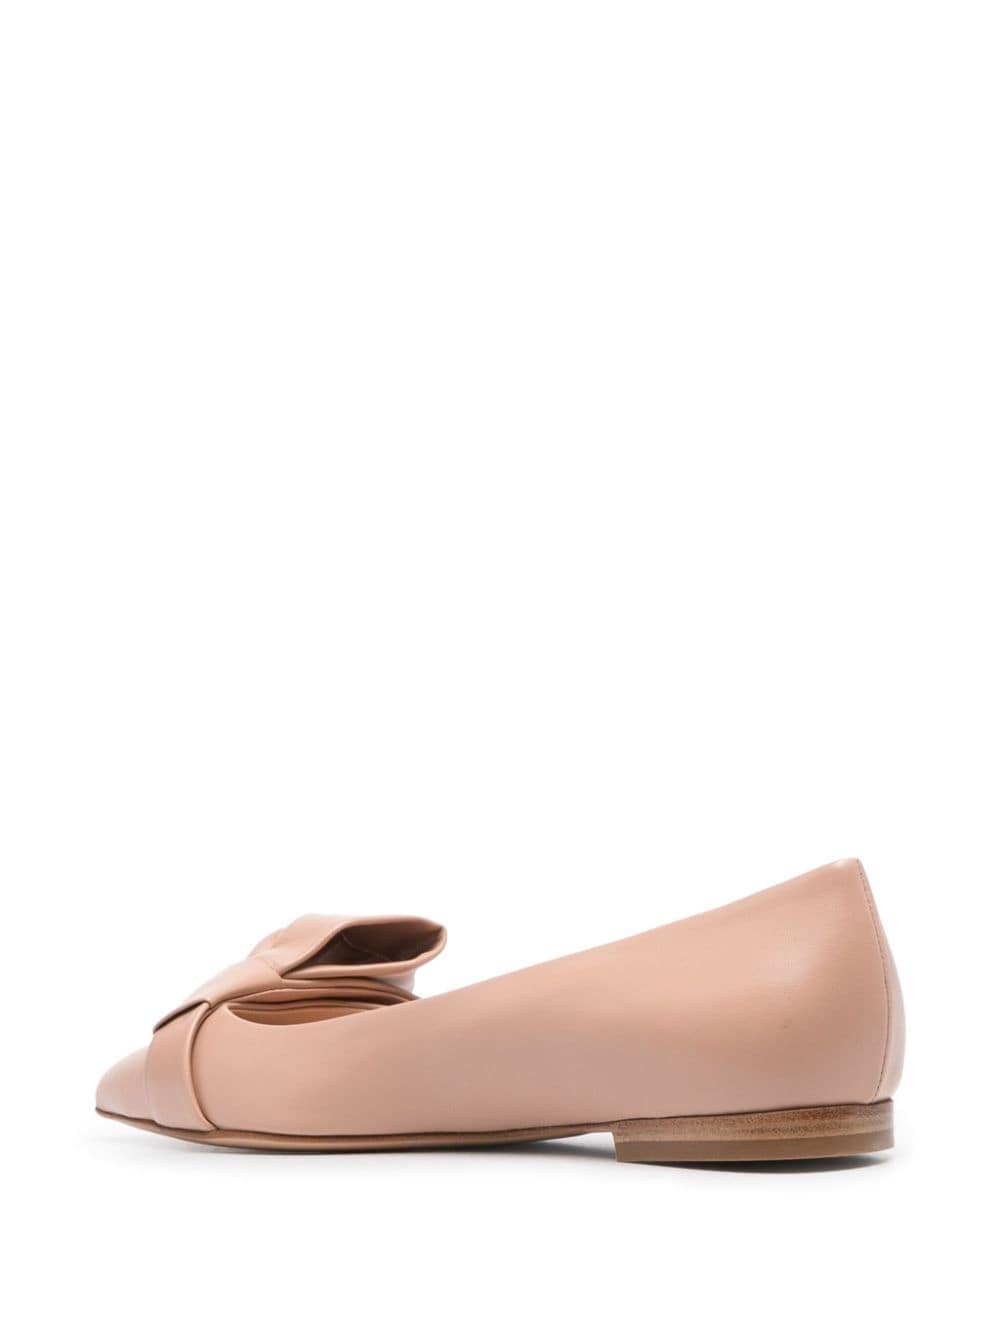 bow-detail leather ballerina shoes - 3